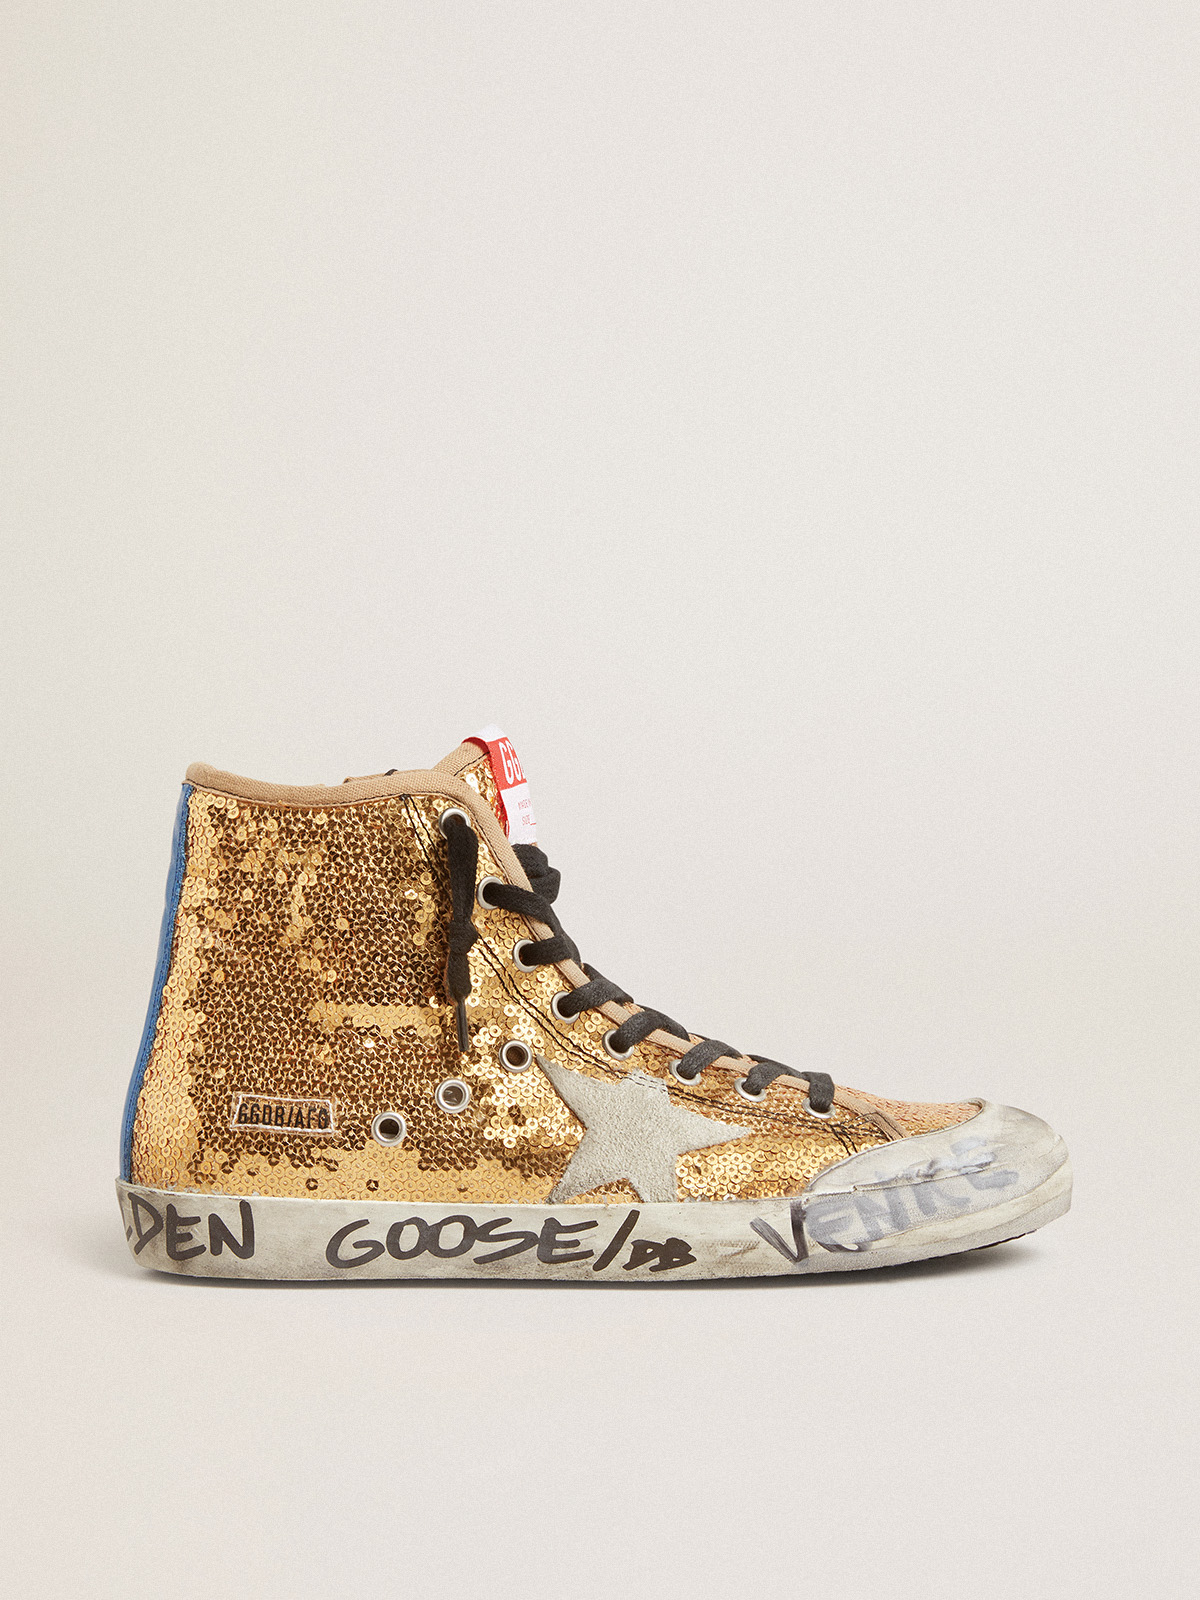 Francy Penstar in gold glitter with suede star and bright blue heel tab |  Golden Goose